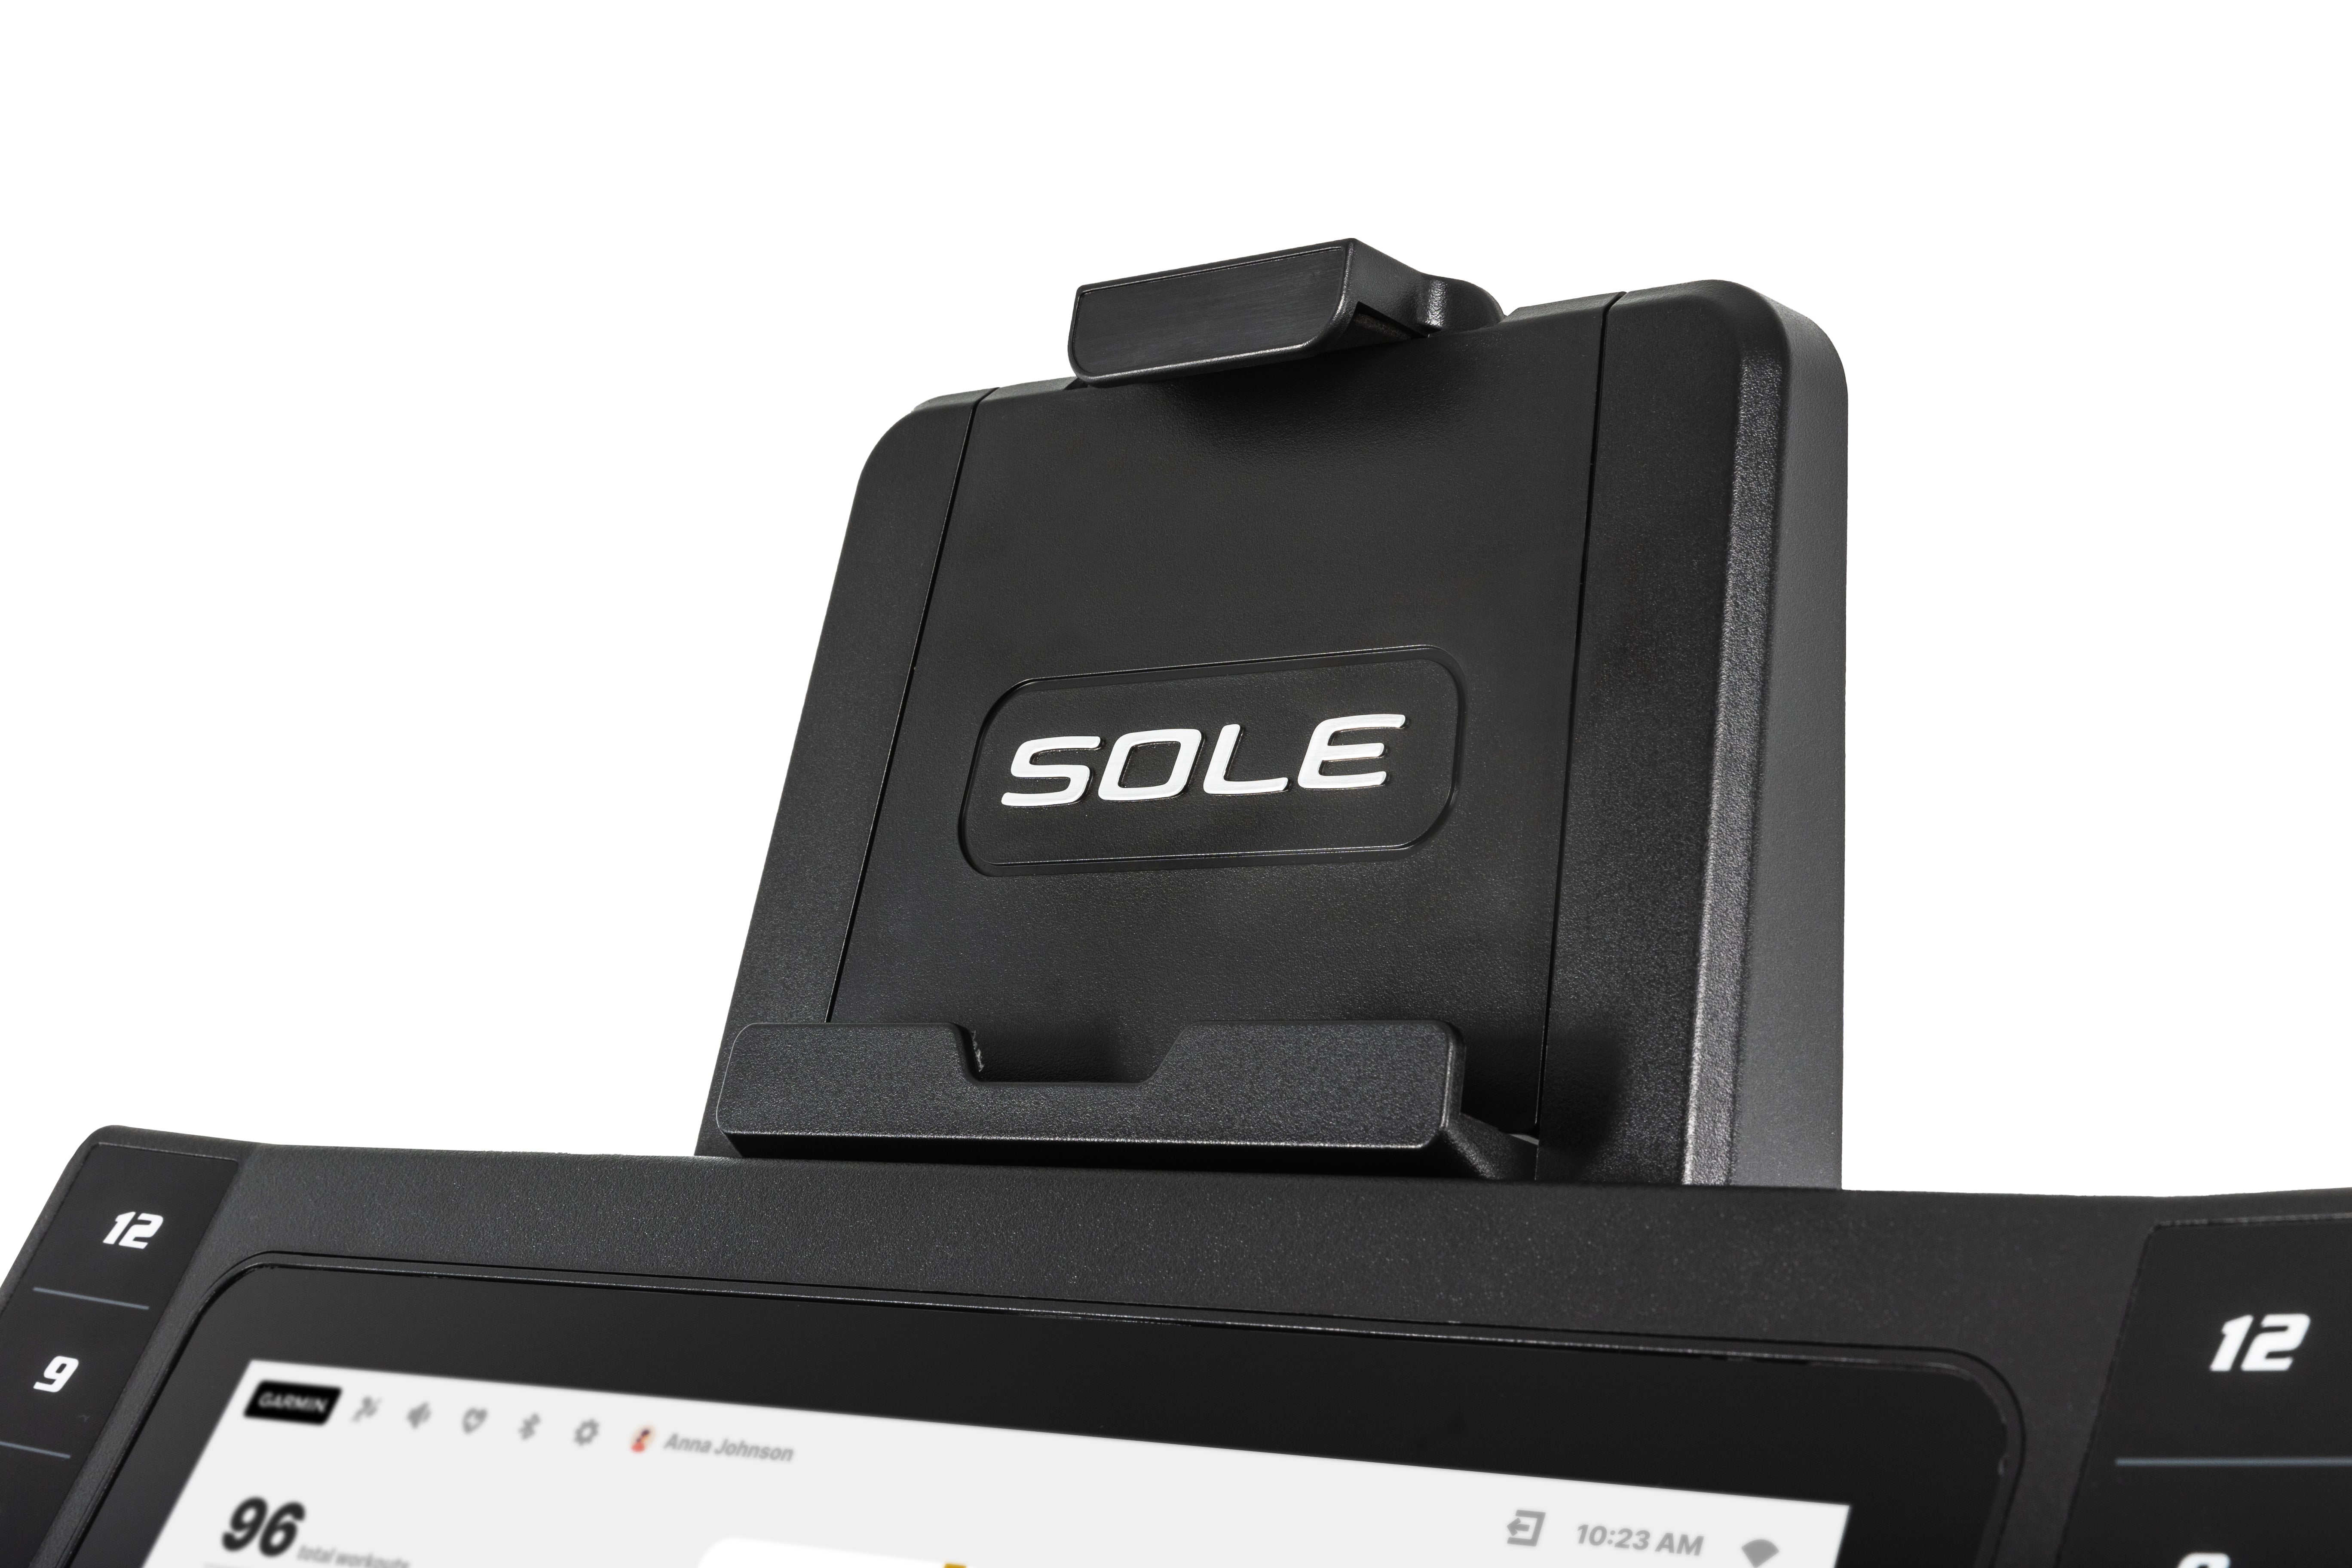 Close-up view of the Sole F85 treadmill's console and display, showing the SOLE logo, speed and incline settings, and a digital screen with user interface.